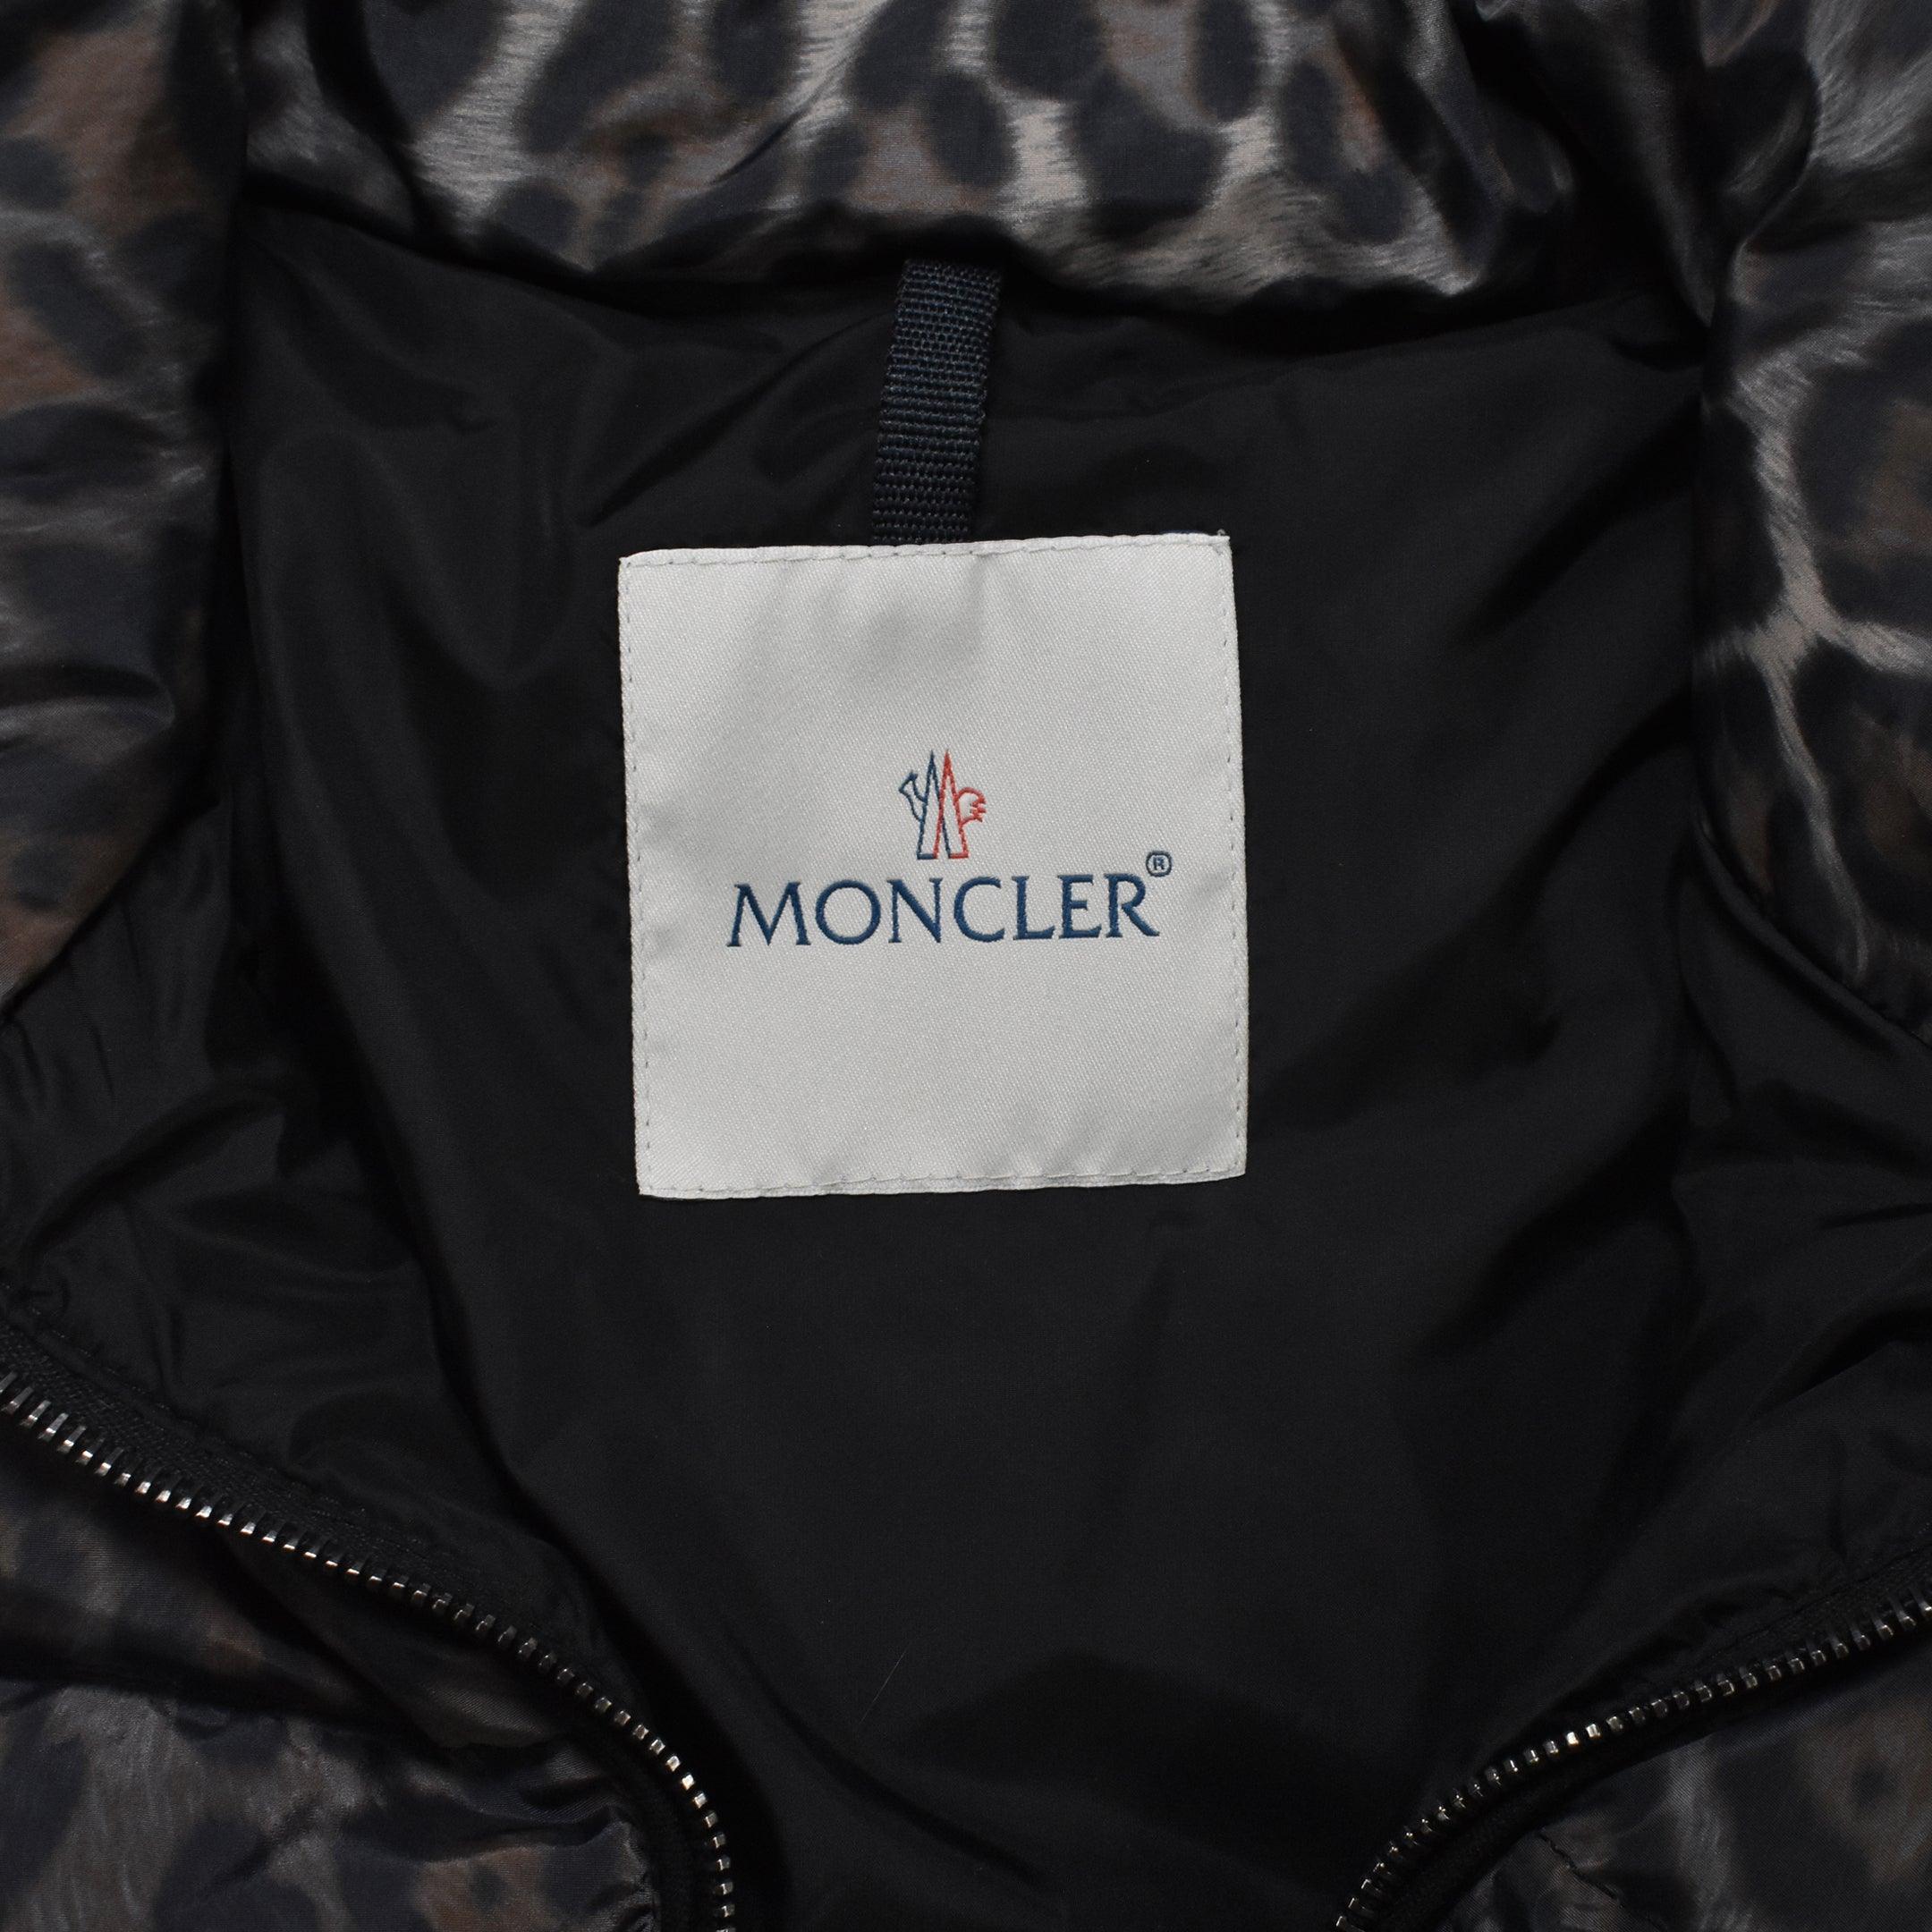 Moncler 'Argentee' Jacket - Women's 0 - Fashionably Yours